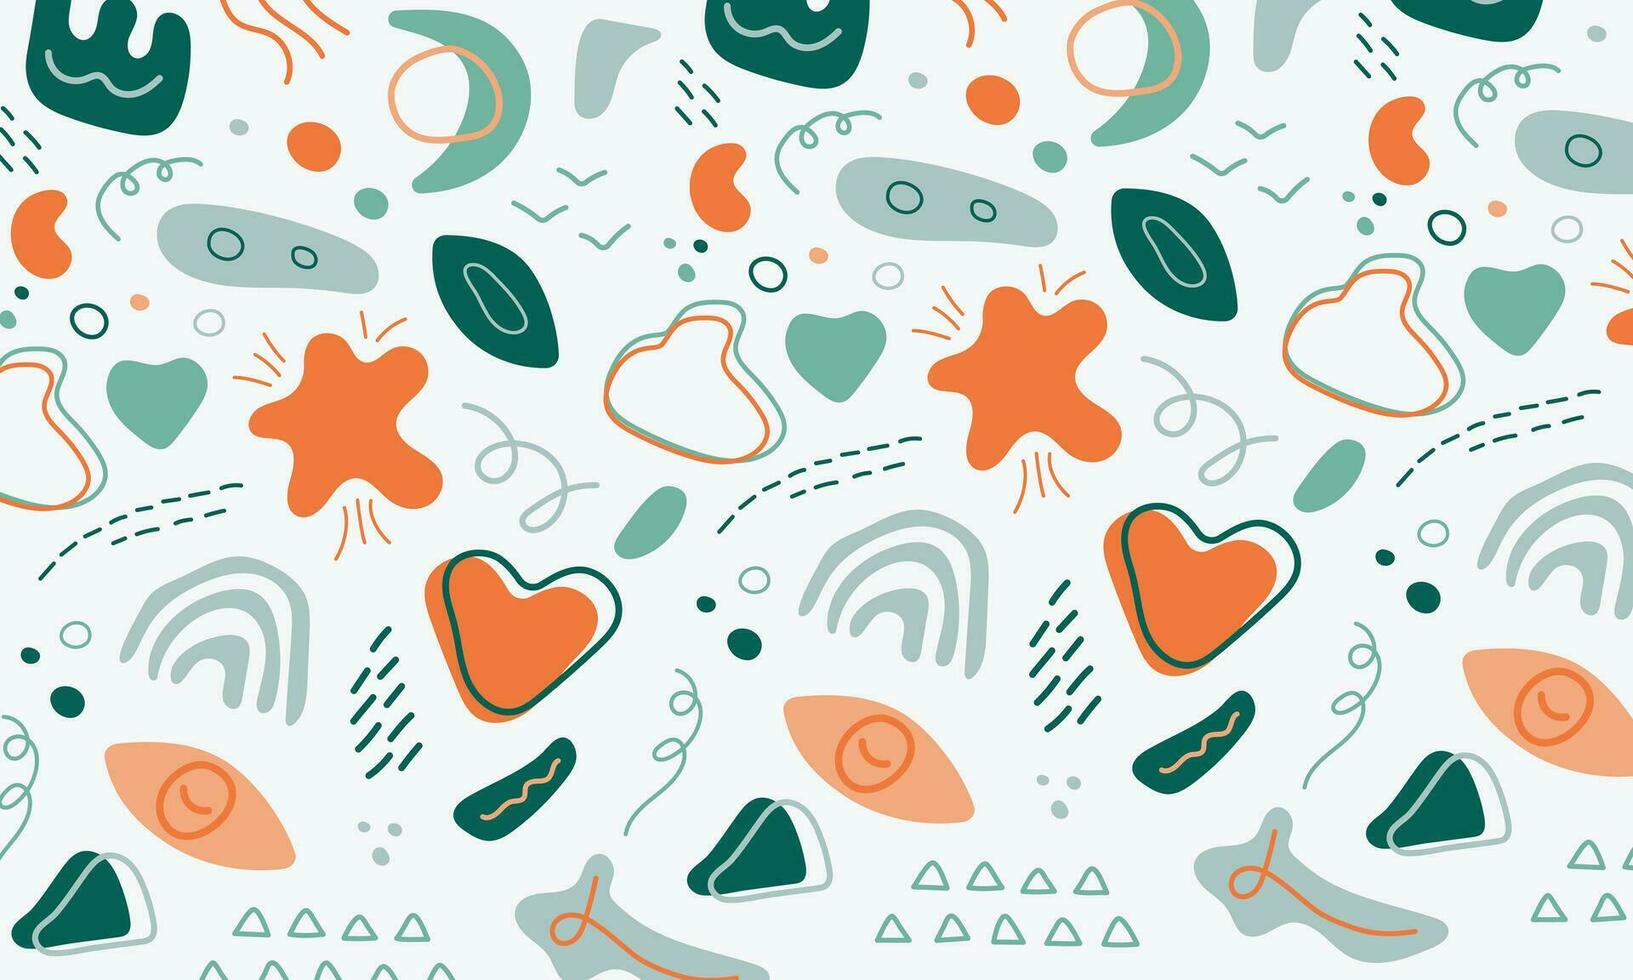 Captivating and playful designs feature a mix of abstract shapes, whimsical doodles, and vibrant colors, making them perfect for adding a touch of charm to your projects vector